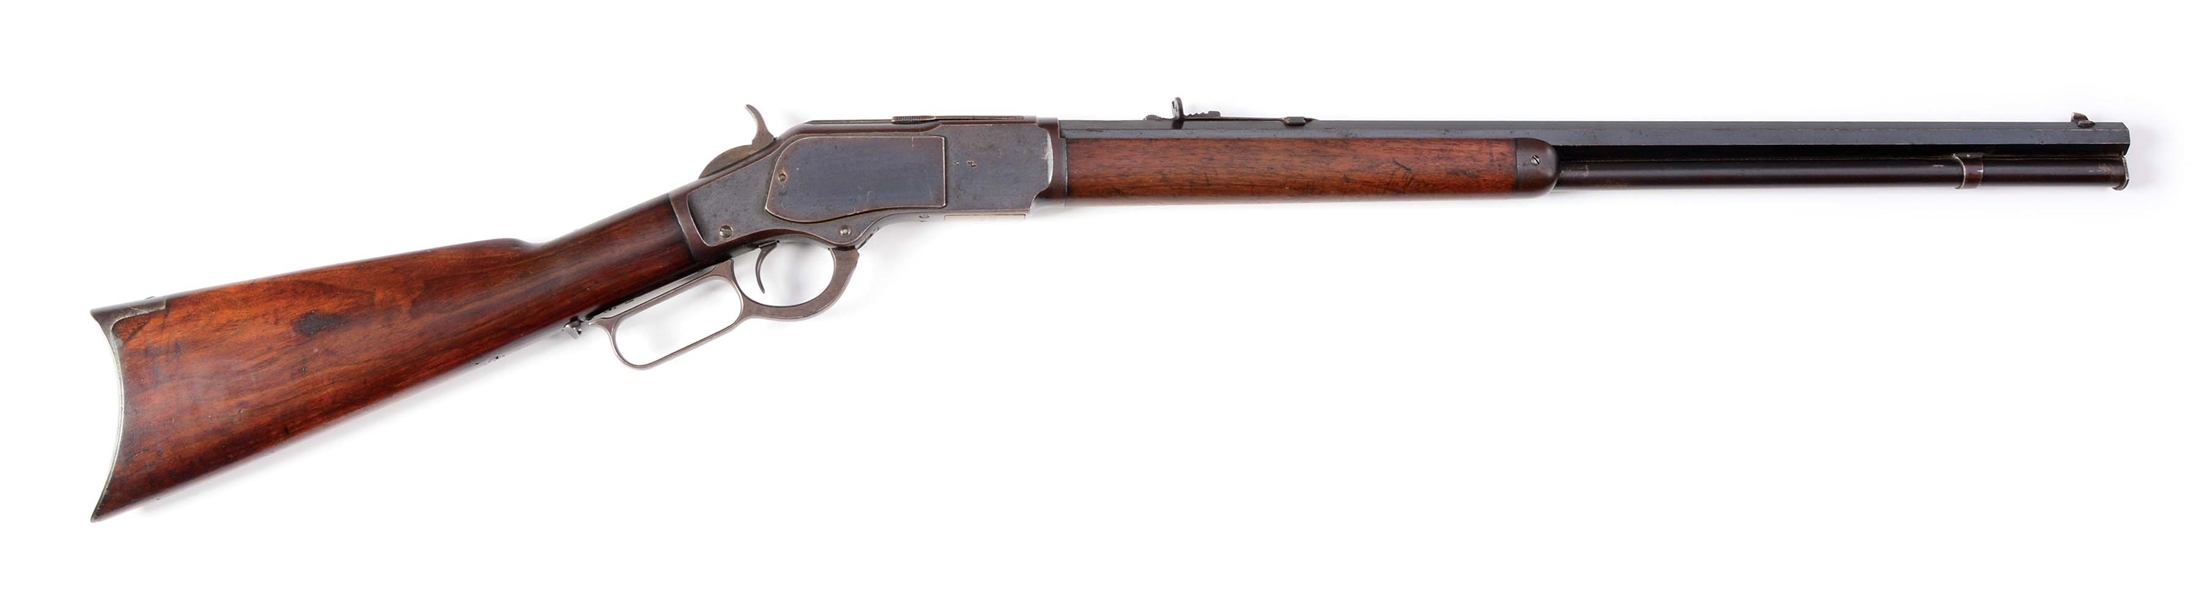 (M) WINCHESTER 3RD MODEL 1873 LEVER ACTION RIFLE (1901).